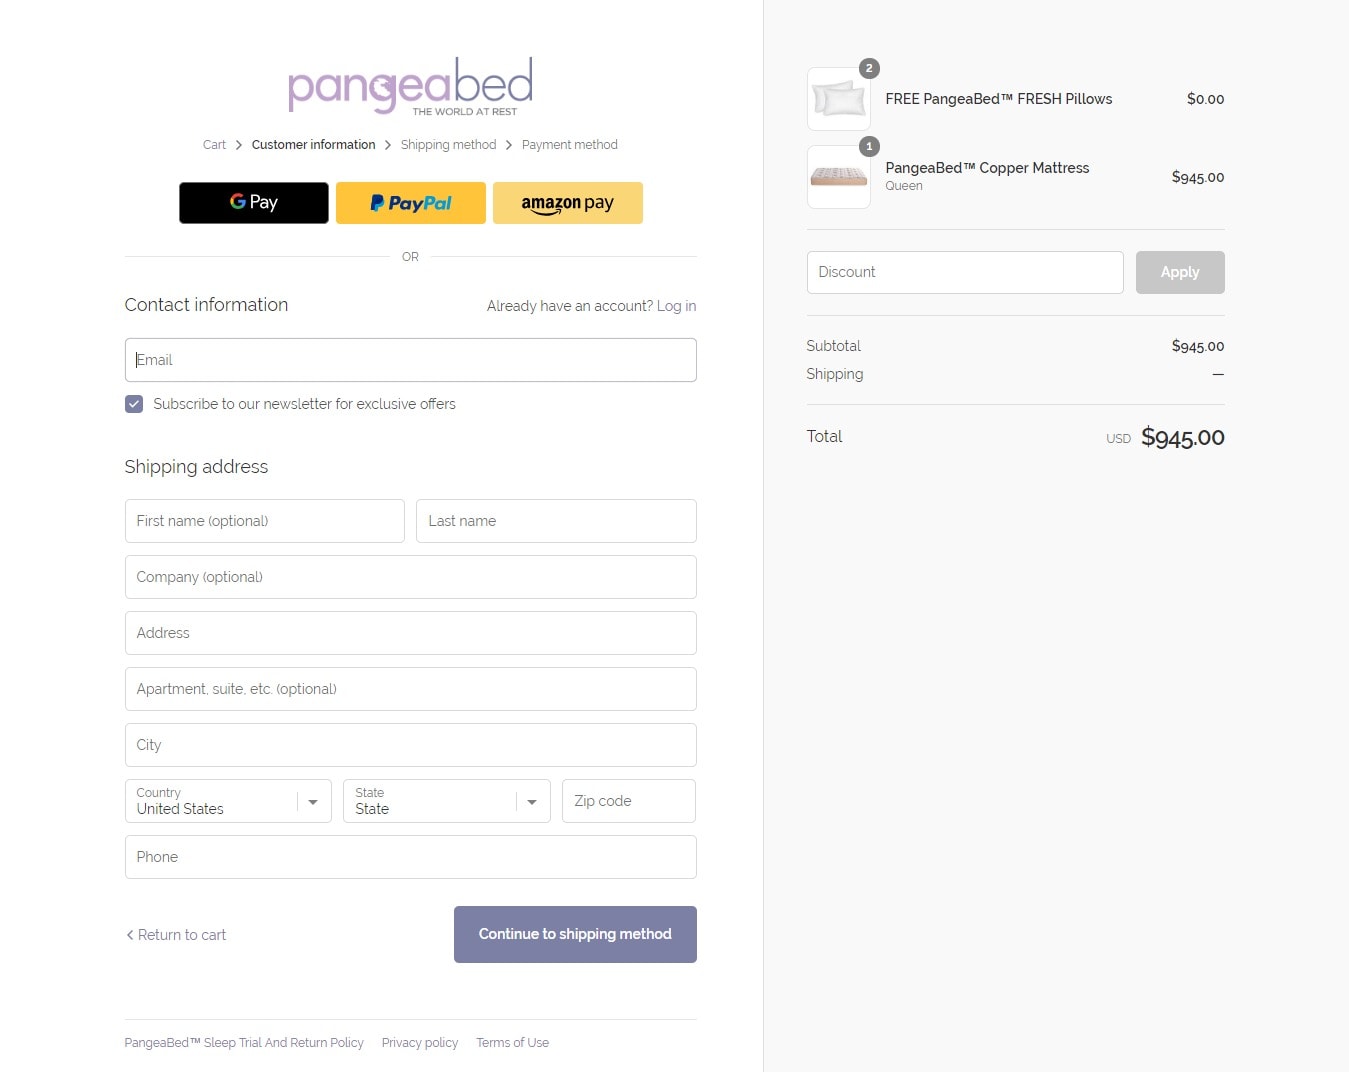 PangeaBed Customer Details